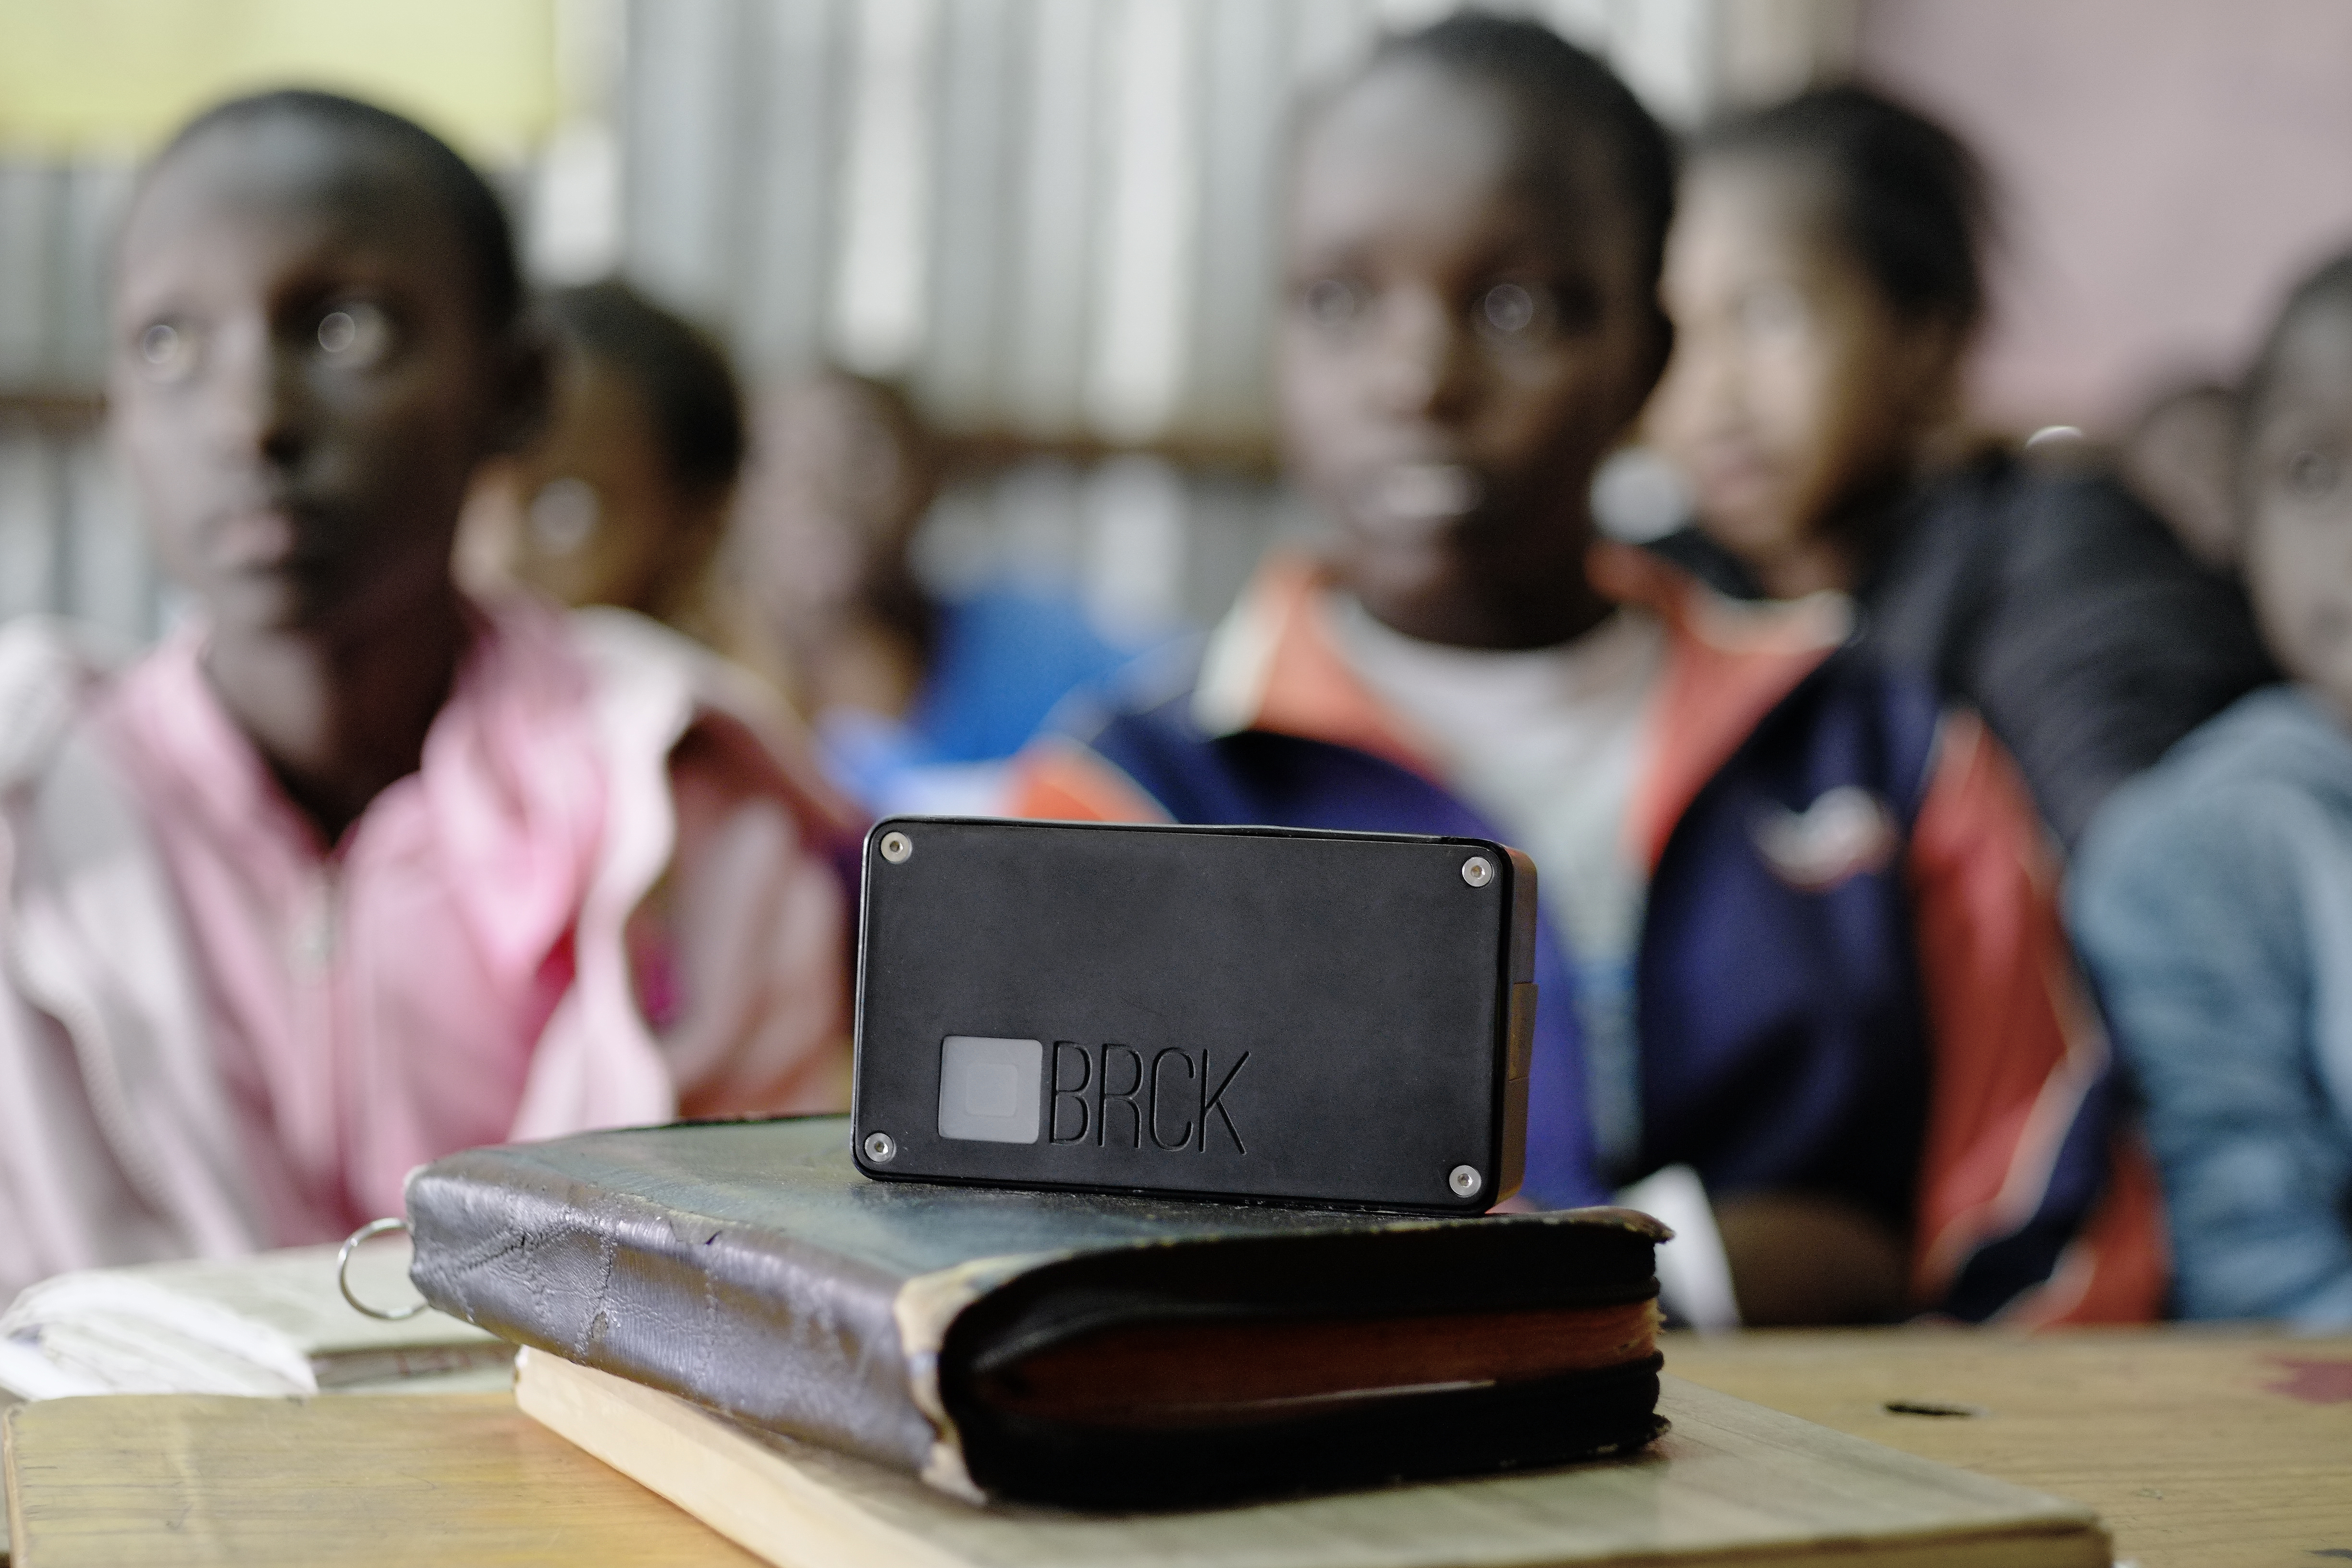 A rugged, mobile wifi device brings the web to schools in Africa and
beyond, thanks to this TED Fellow